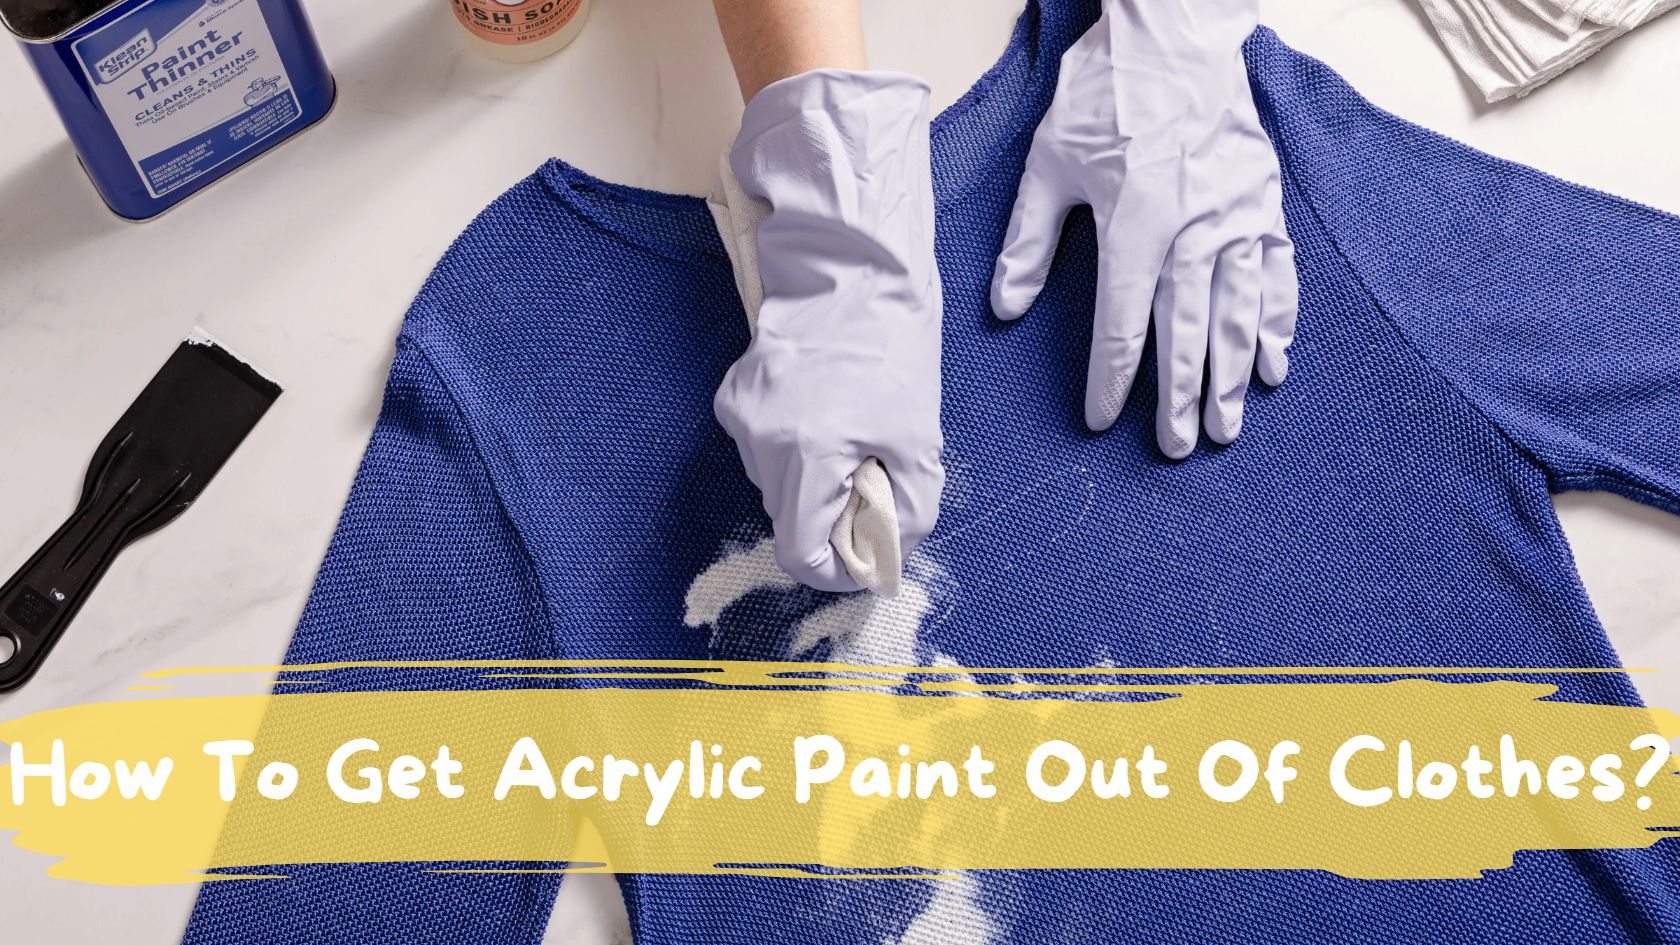 How To Get Acrylic Paint Out Of Clothes